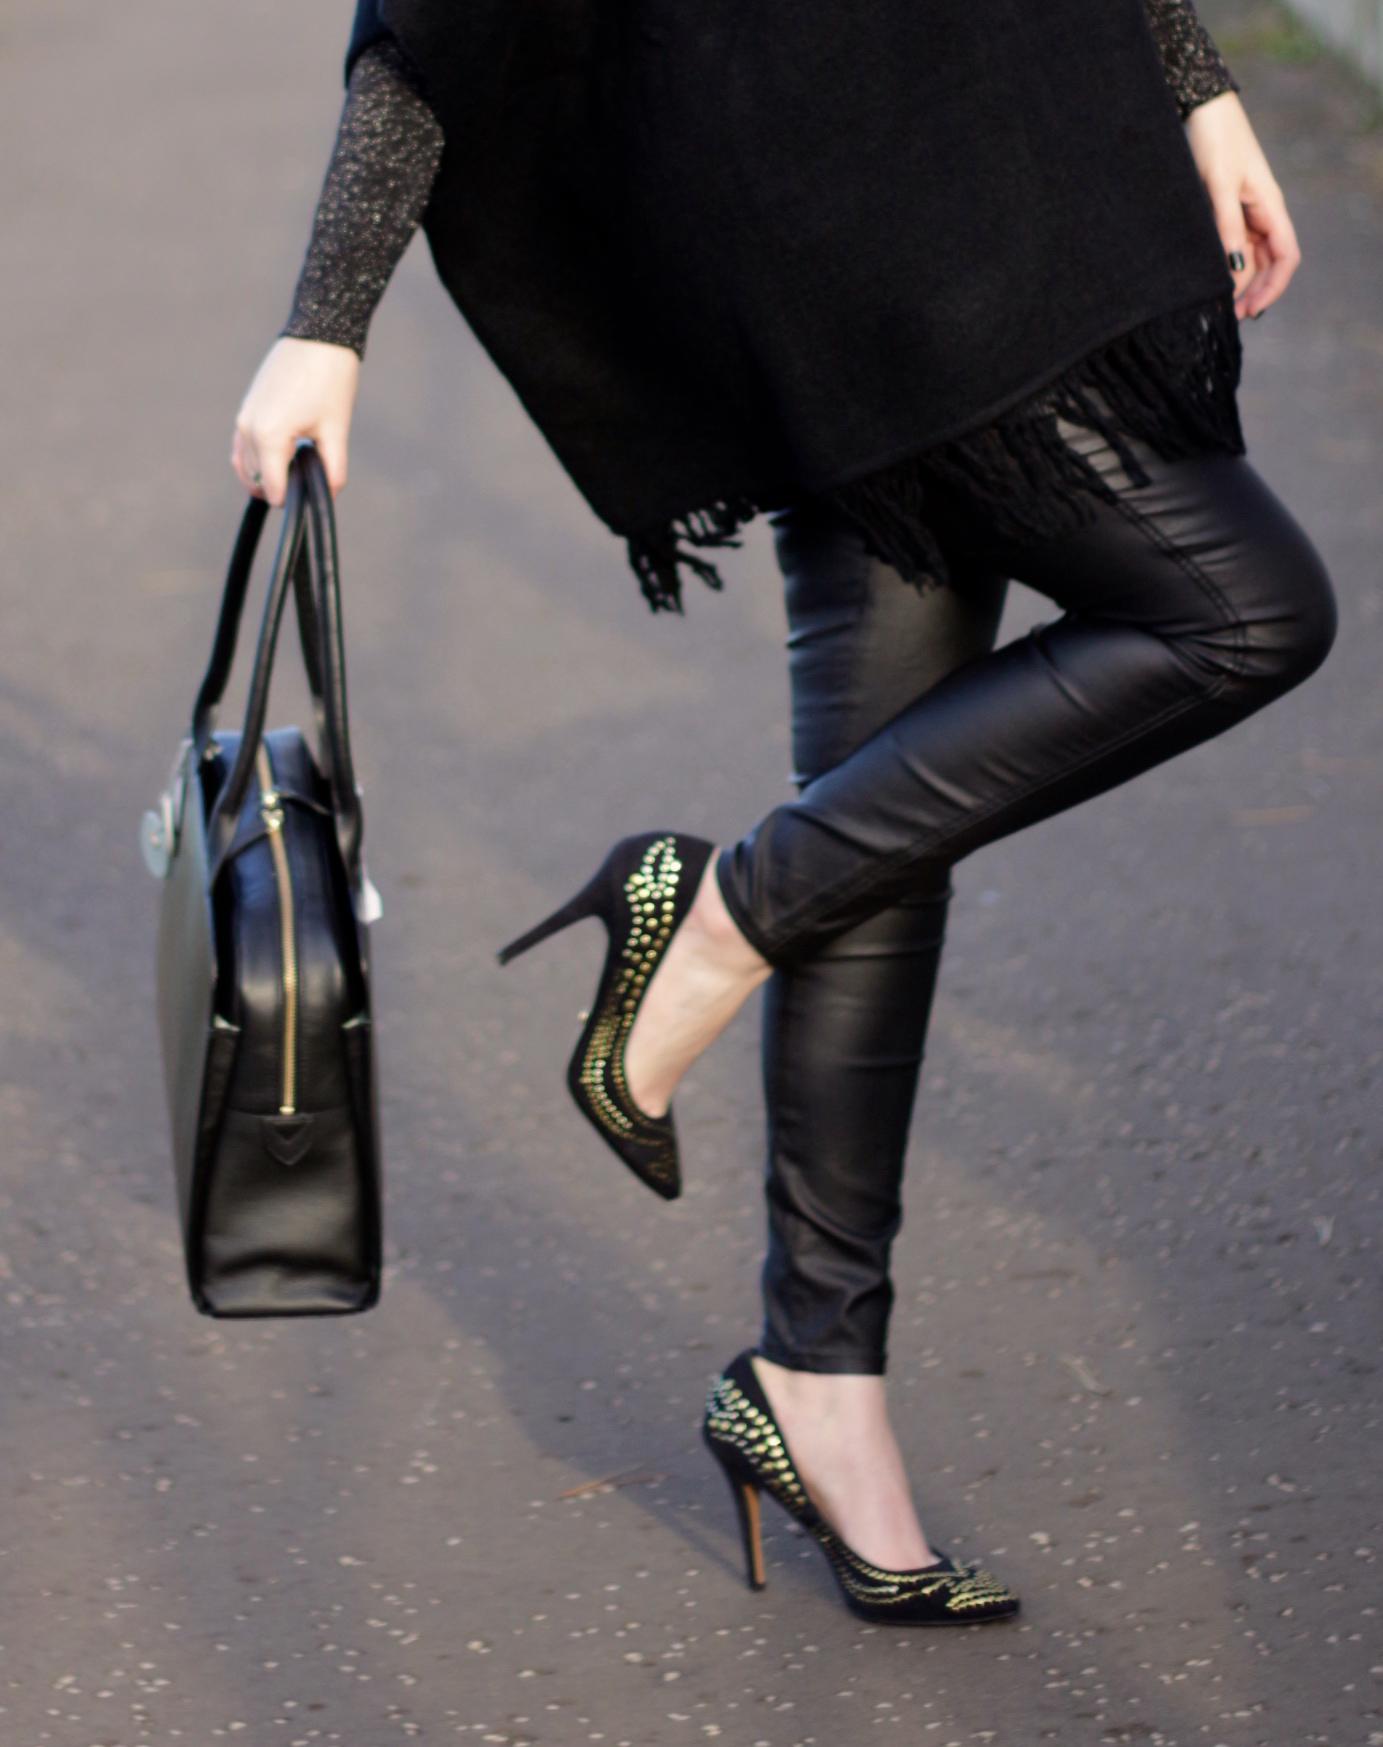 black poncho and leather jeans outfit of the day